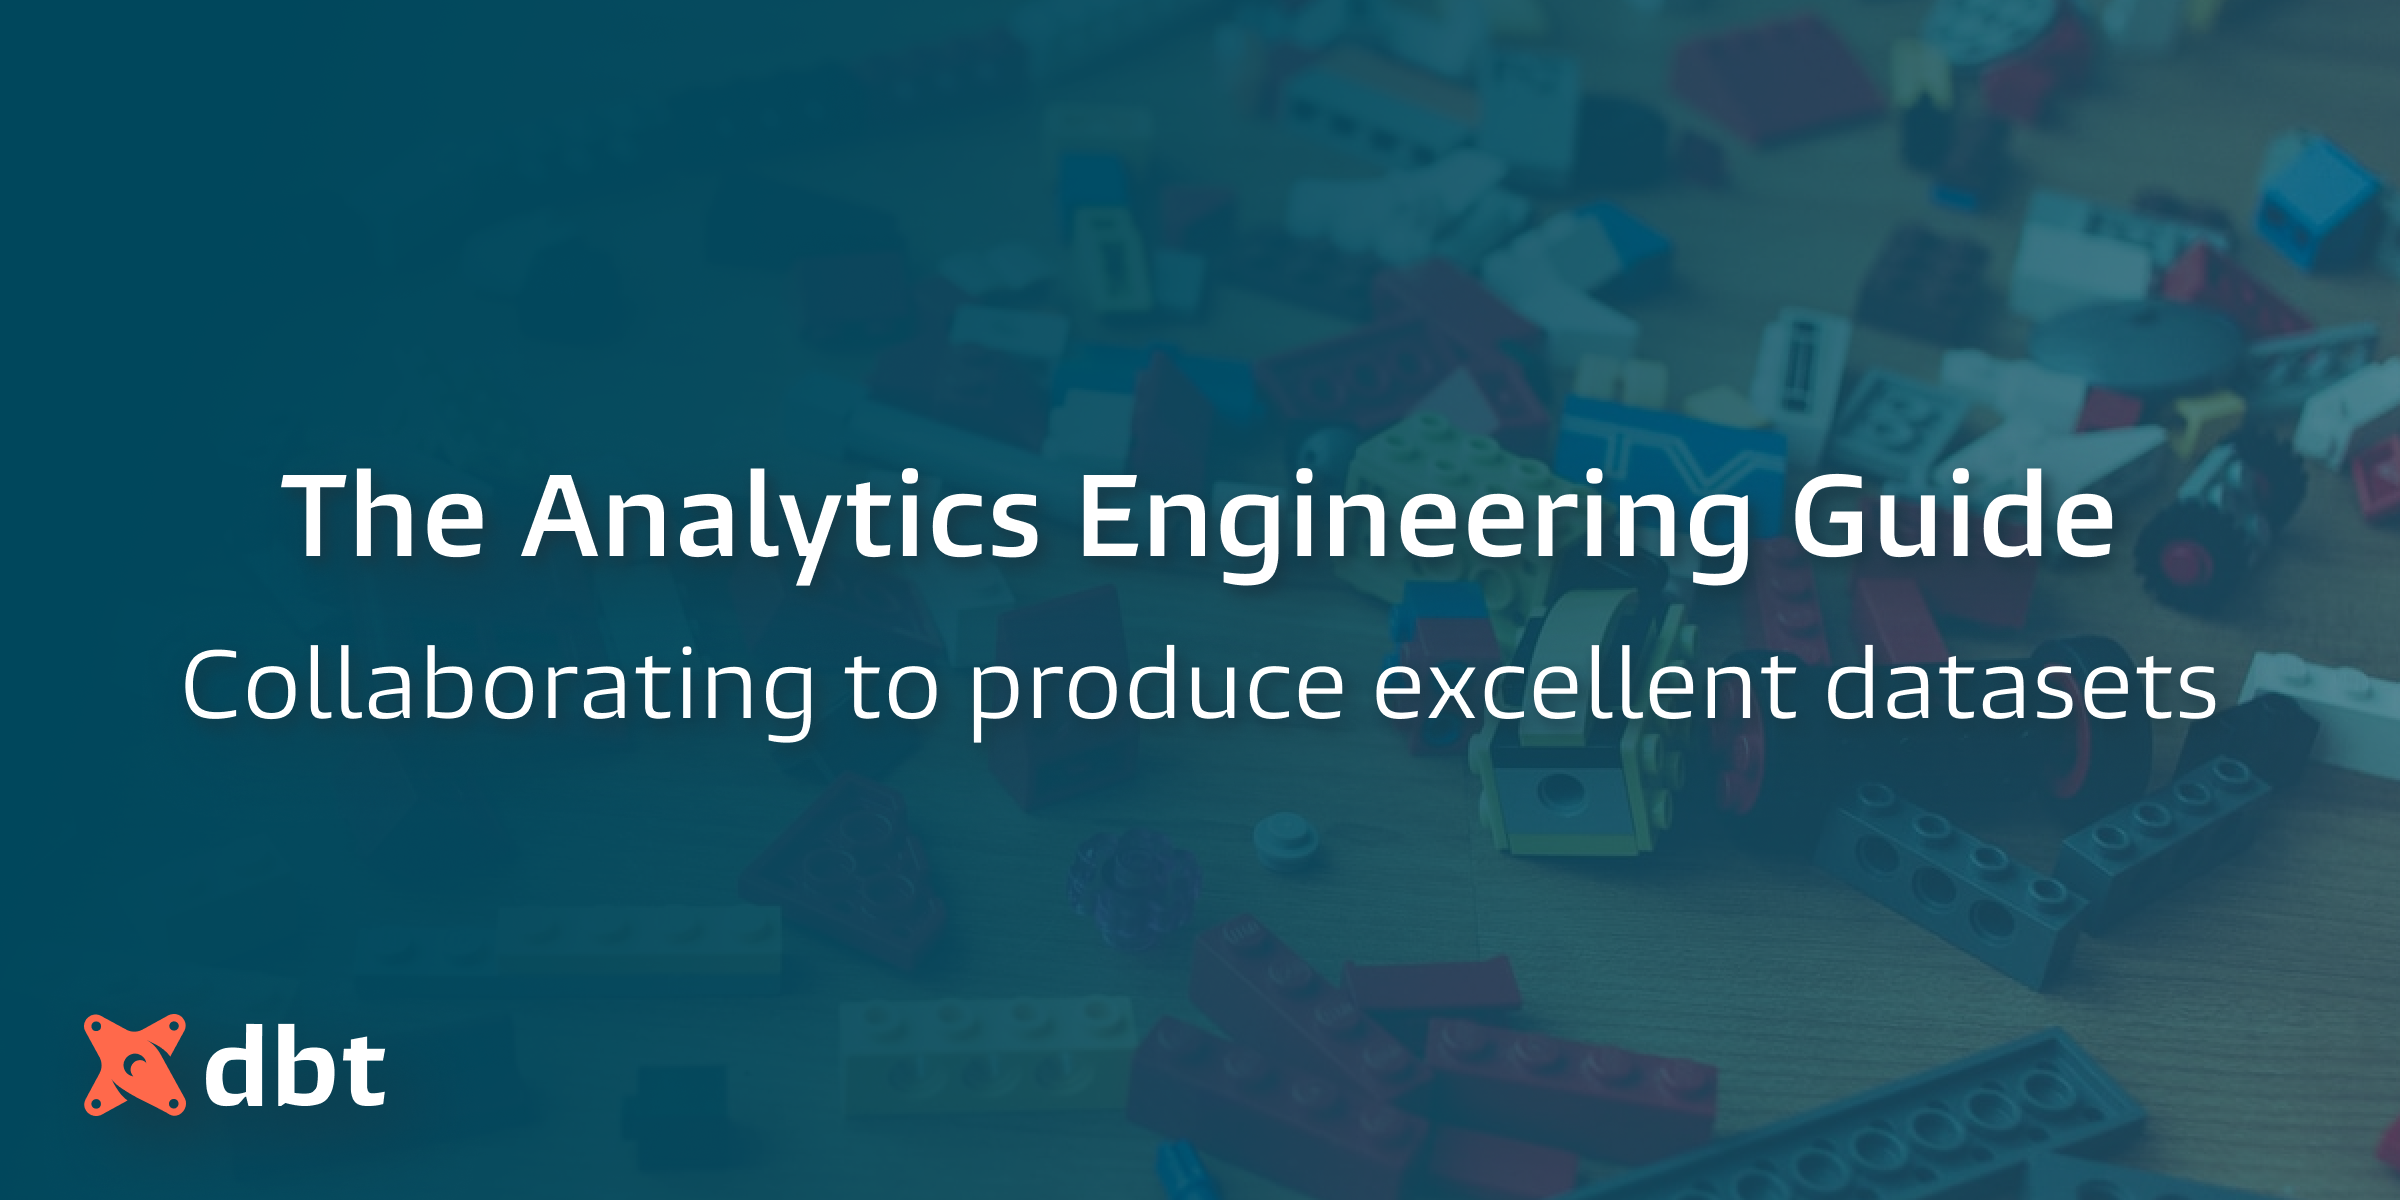 Guide to writing analytics engineer and data analyst job descriptions